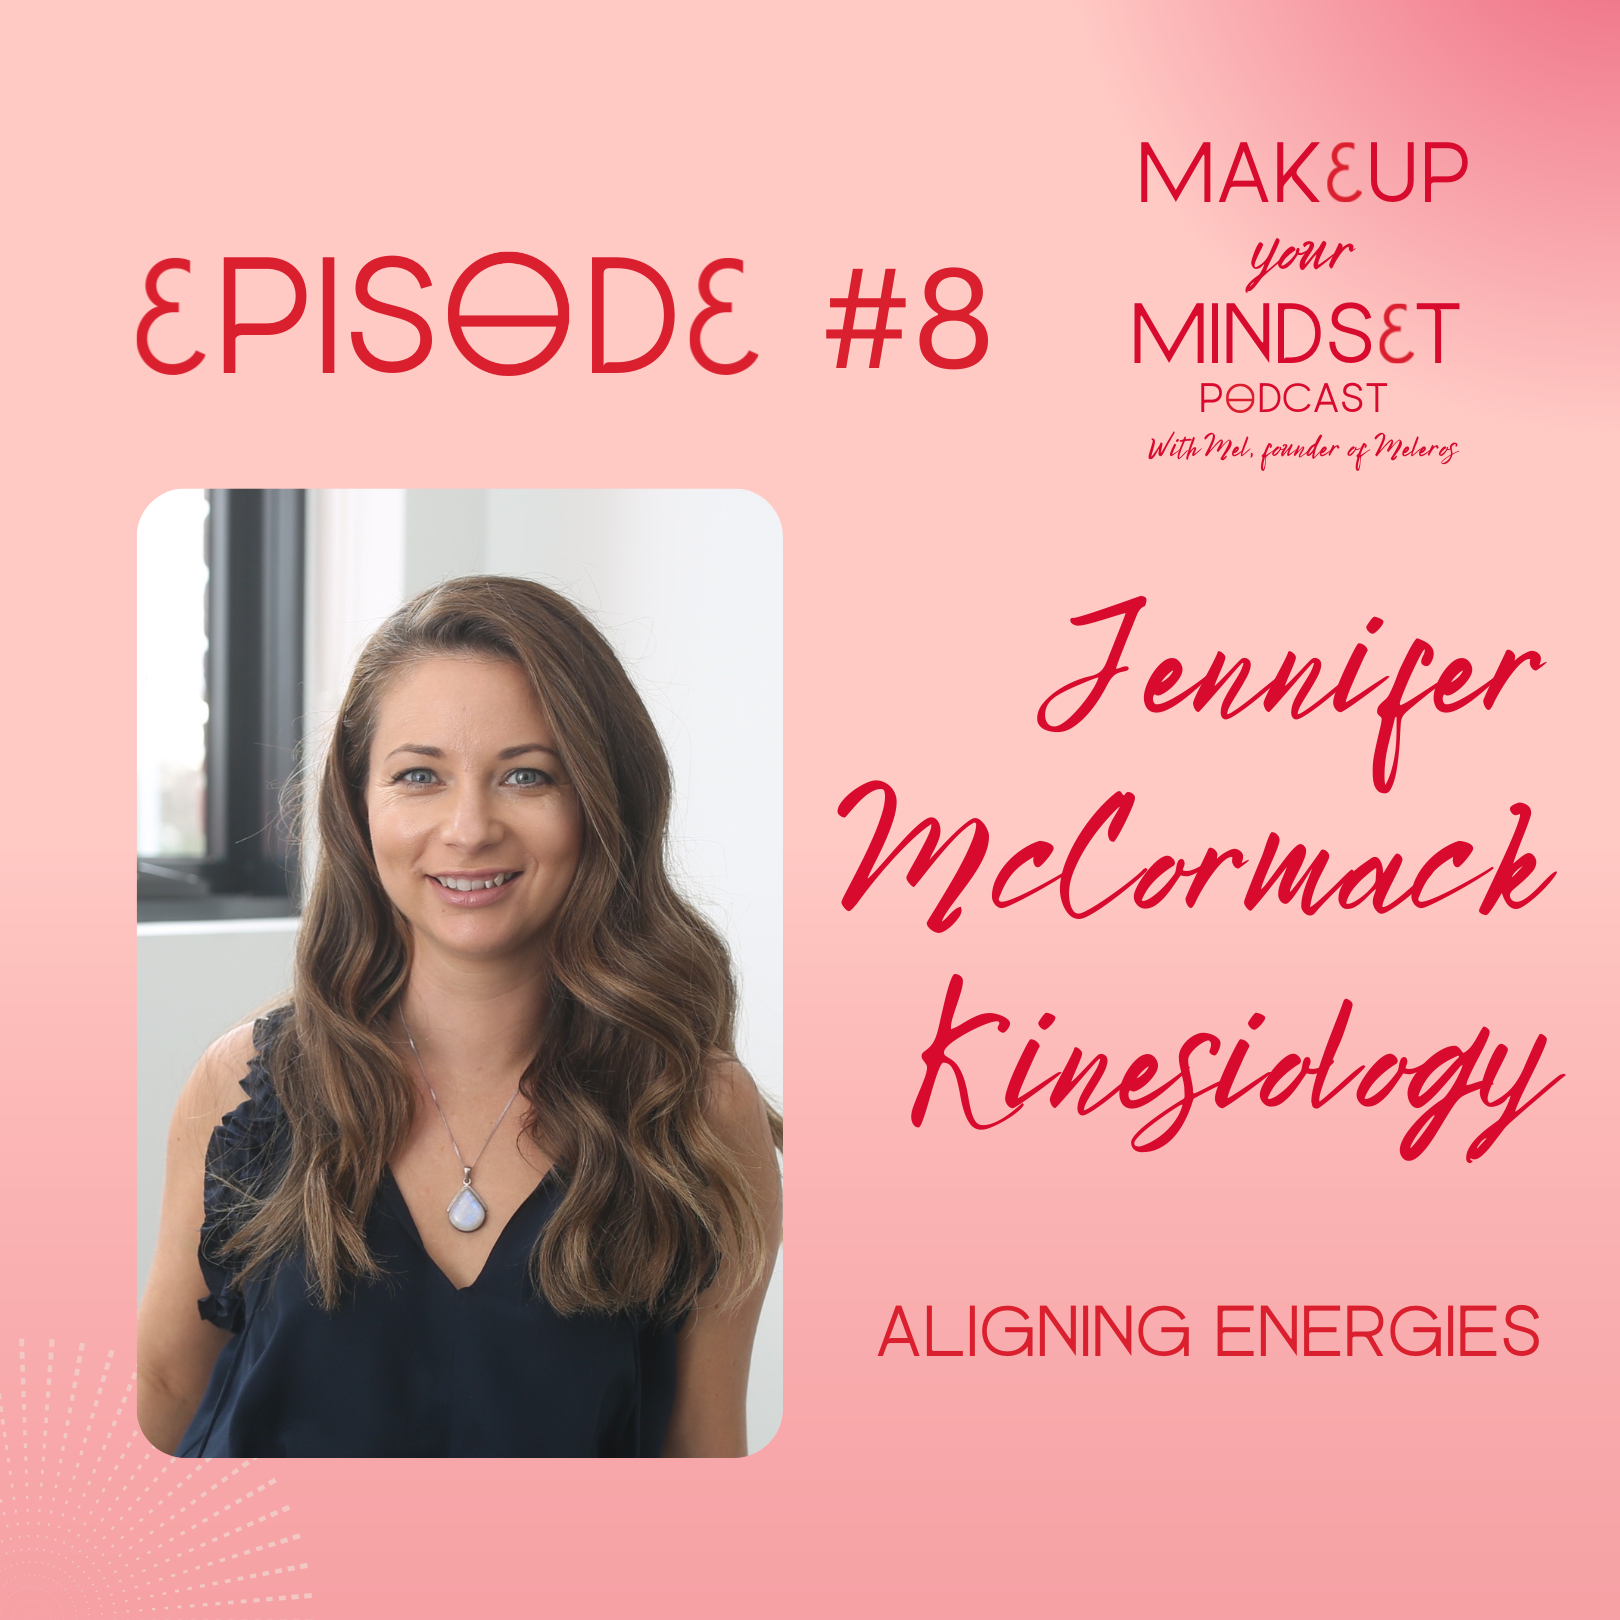 Jennifer McCormack - How can you change your life with Kinesiology?